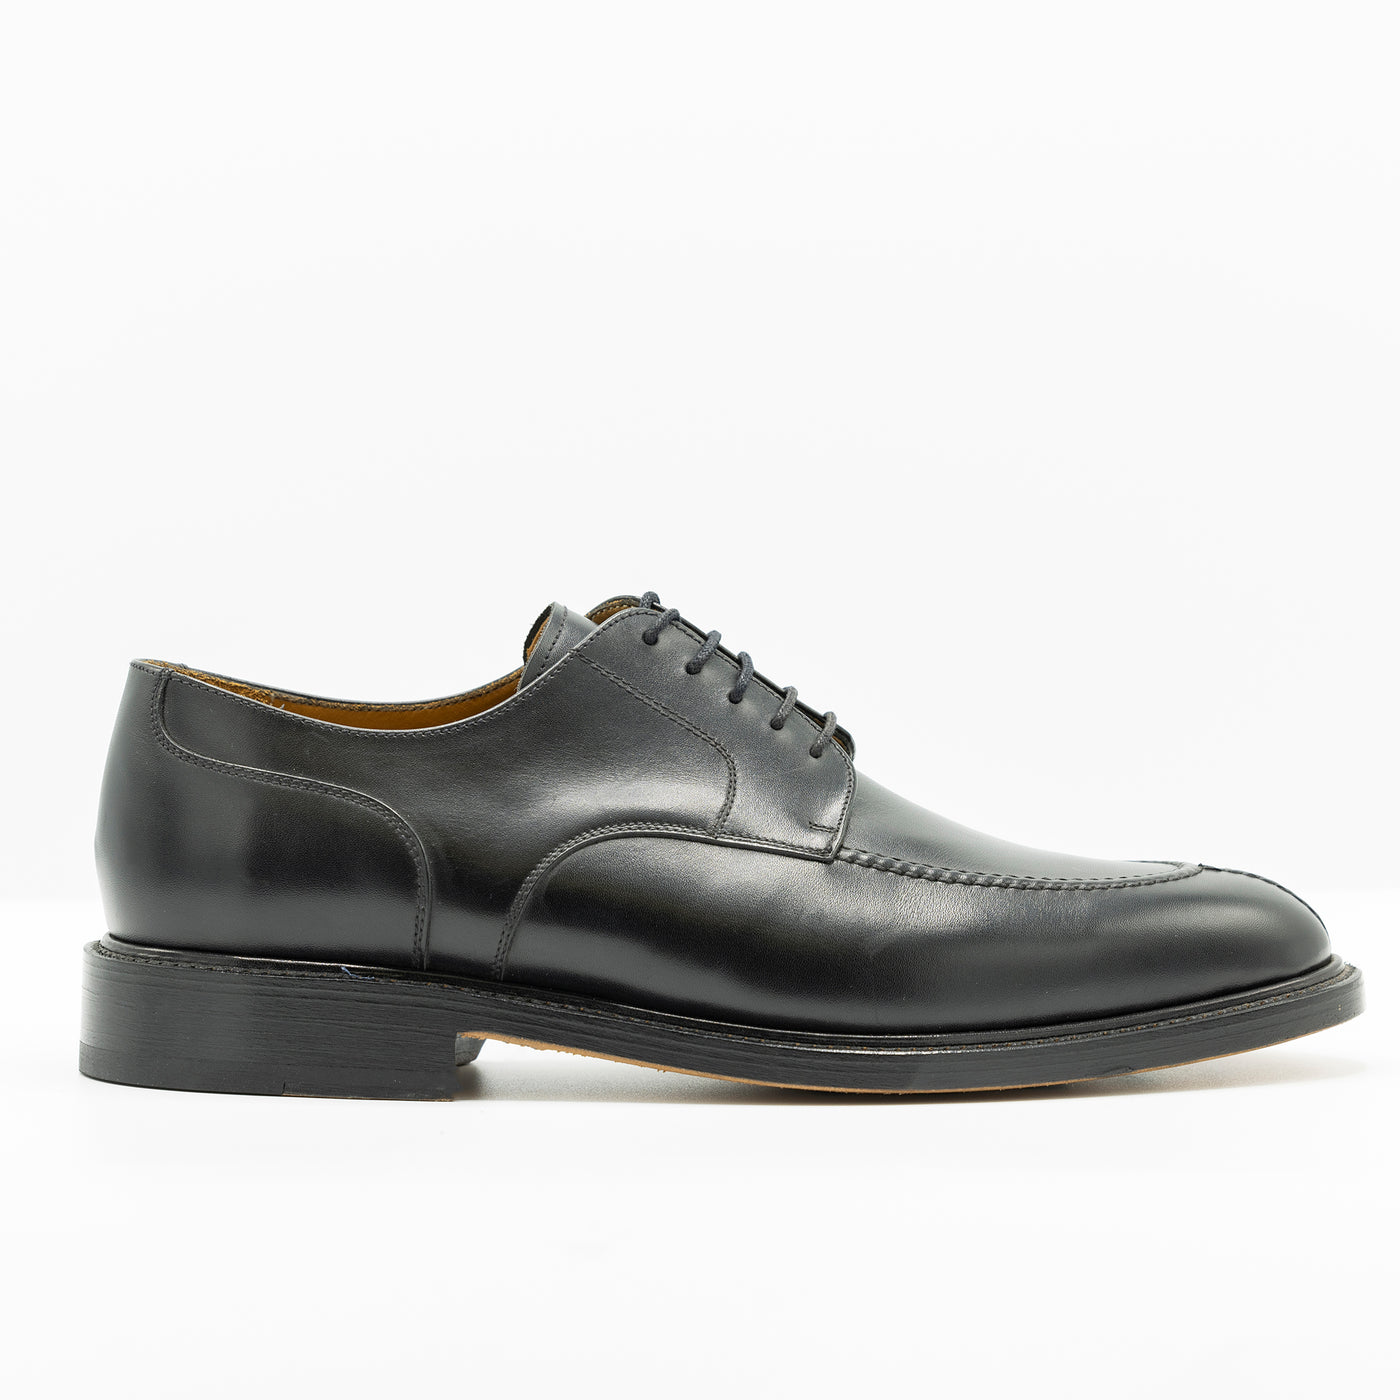 THE DERBY IN BLACK LEATHER